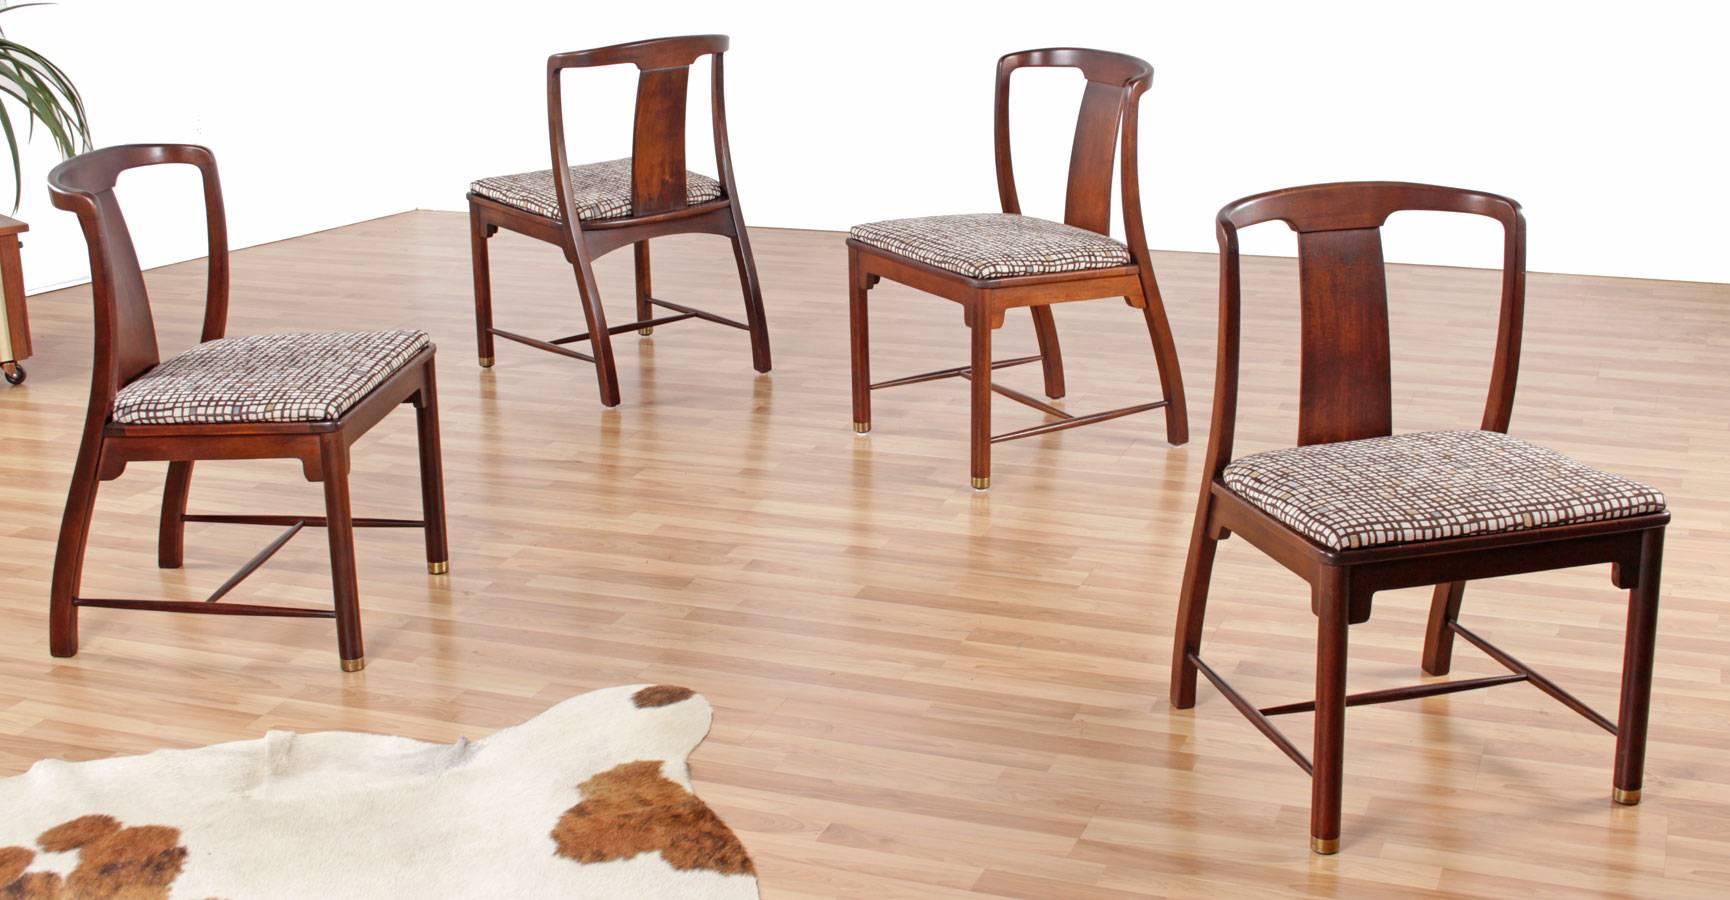 Set of four elegant midcentury chinoiserie dining chairs. The chairs exhibit a form that can best be described as Chinese Minimalist. The jet-set age fascination with exotic cultures is brought to life in this handsome group. The designer chose to